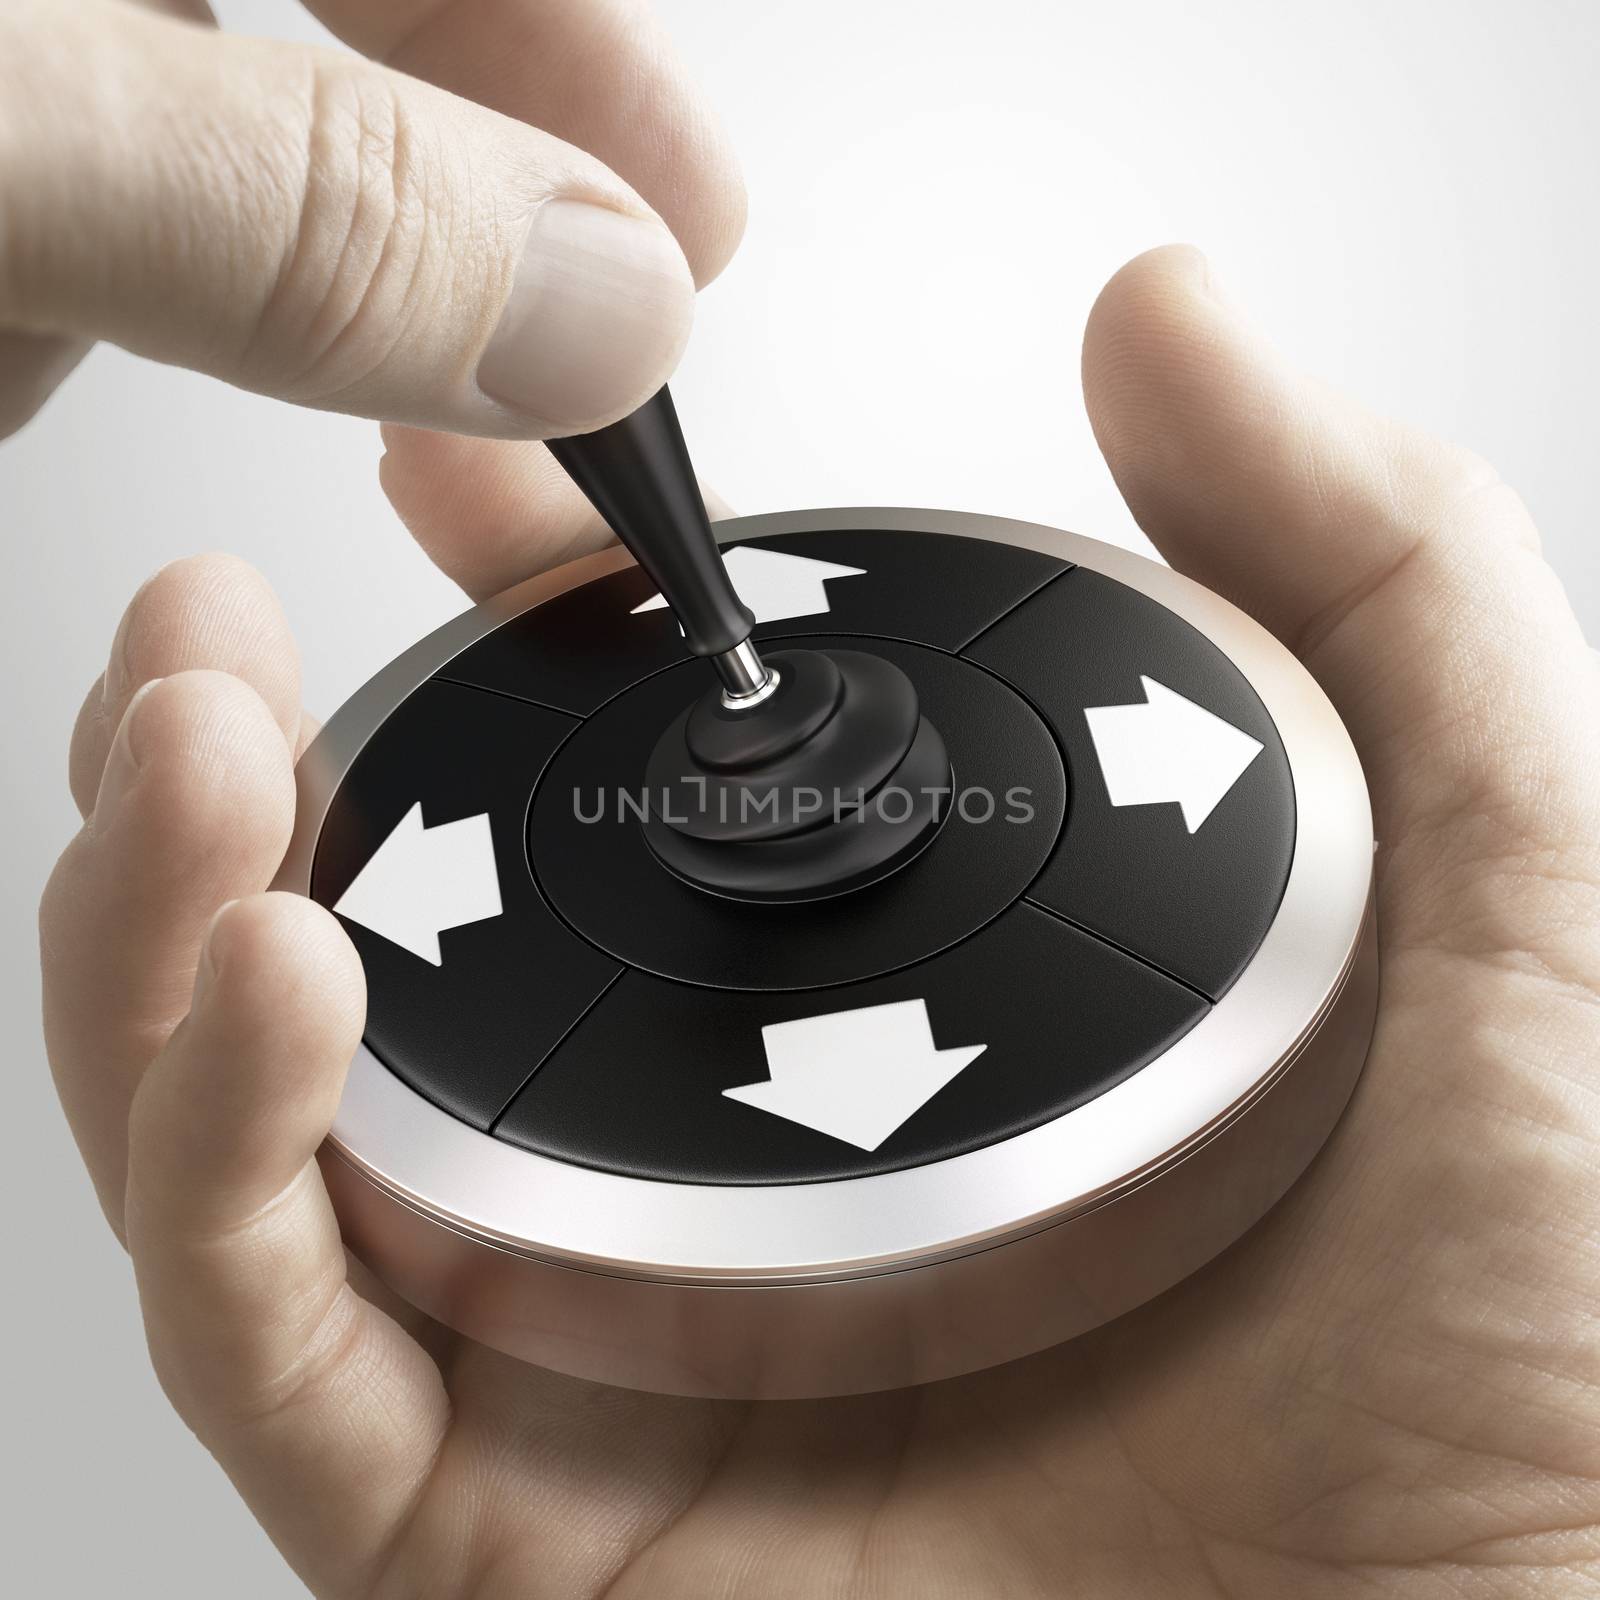 Man using a conceptual joystick to change direction. Strategic orientation concept. Composite image between a hand photography and a 3D background.